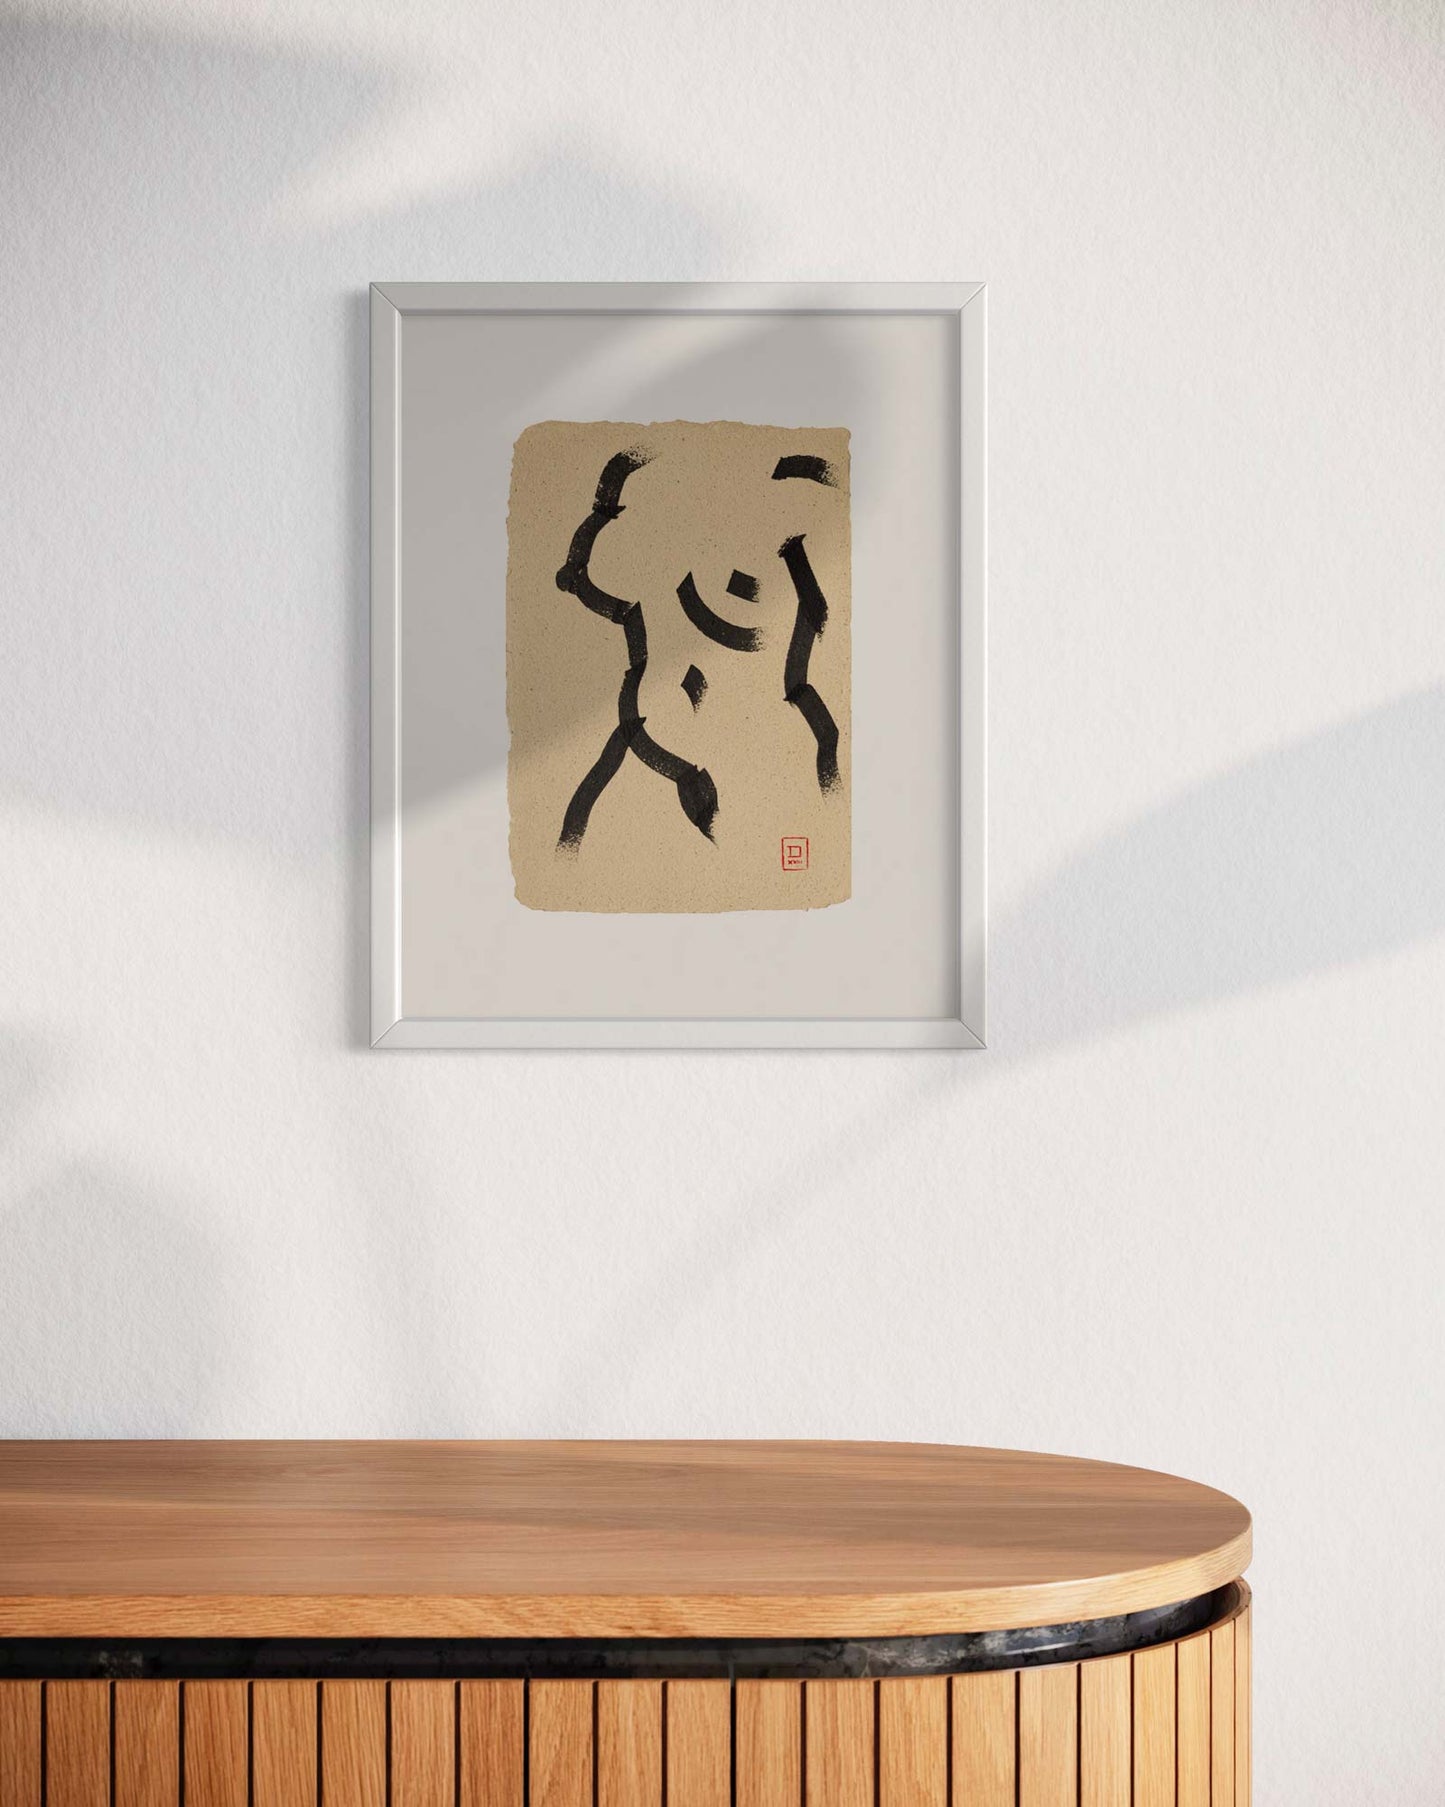 Eluding images №2. Original figurative drawing - in an interior